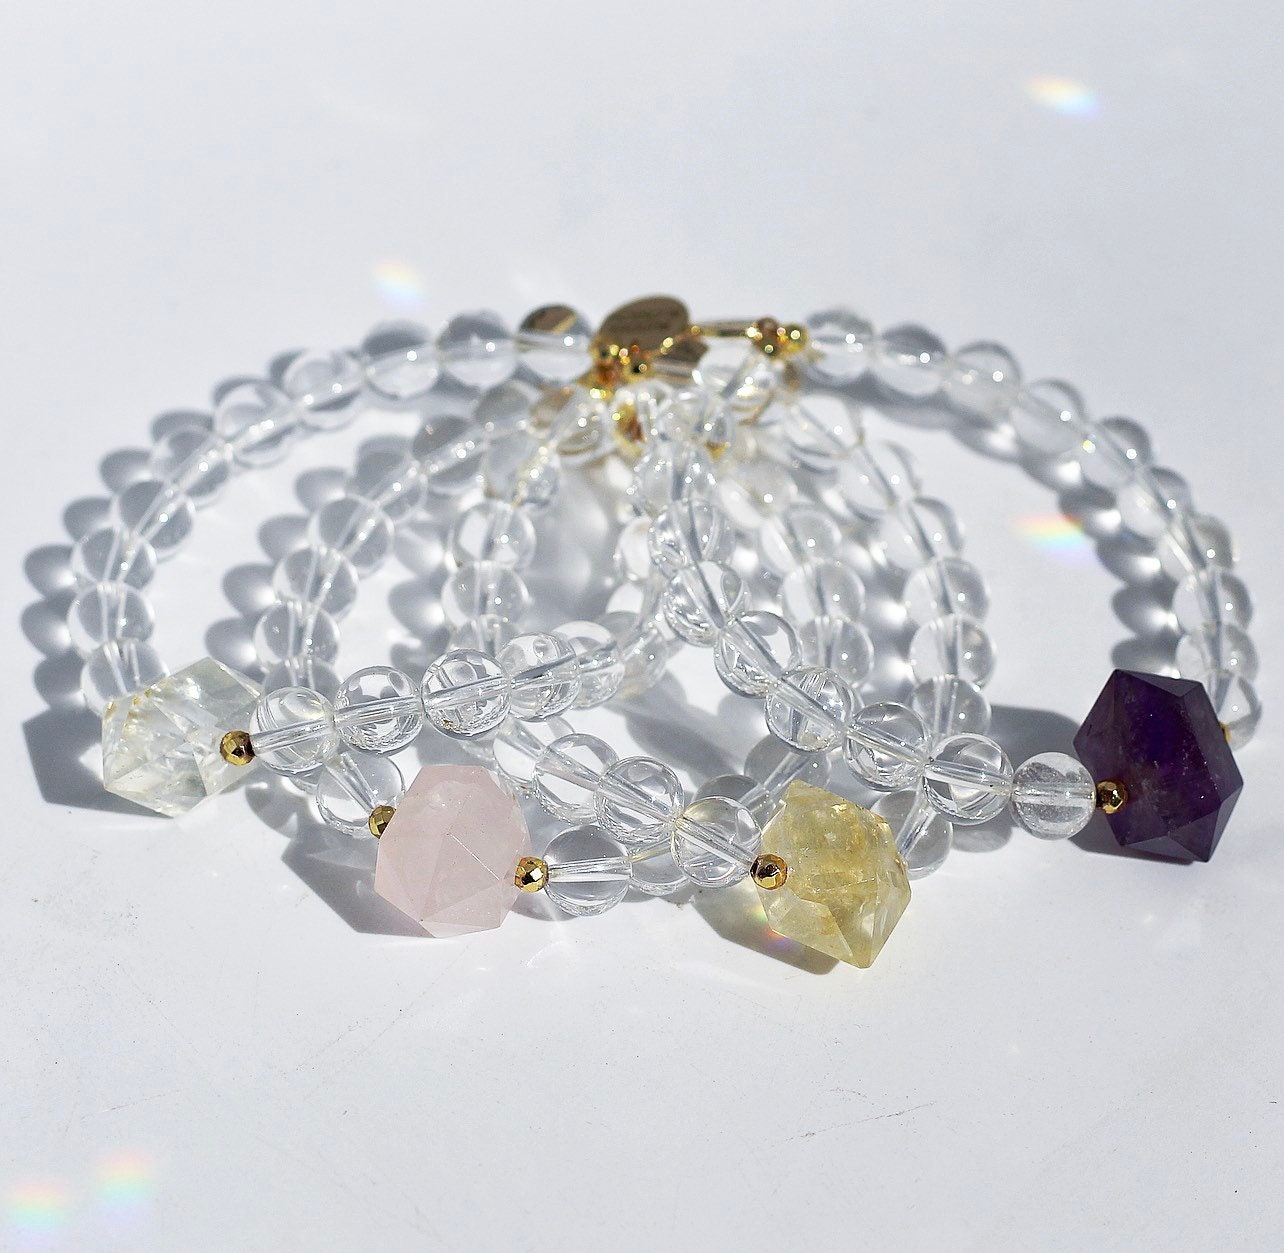 Crystal Quartz Bracelet For Strength & Clarity (Certified) - Crystals Store